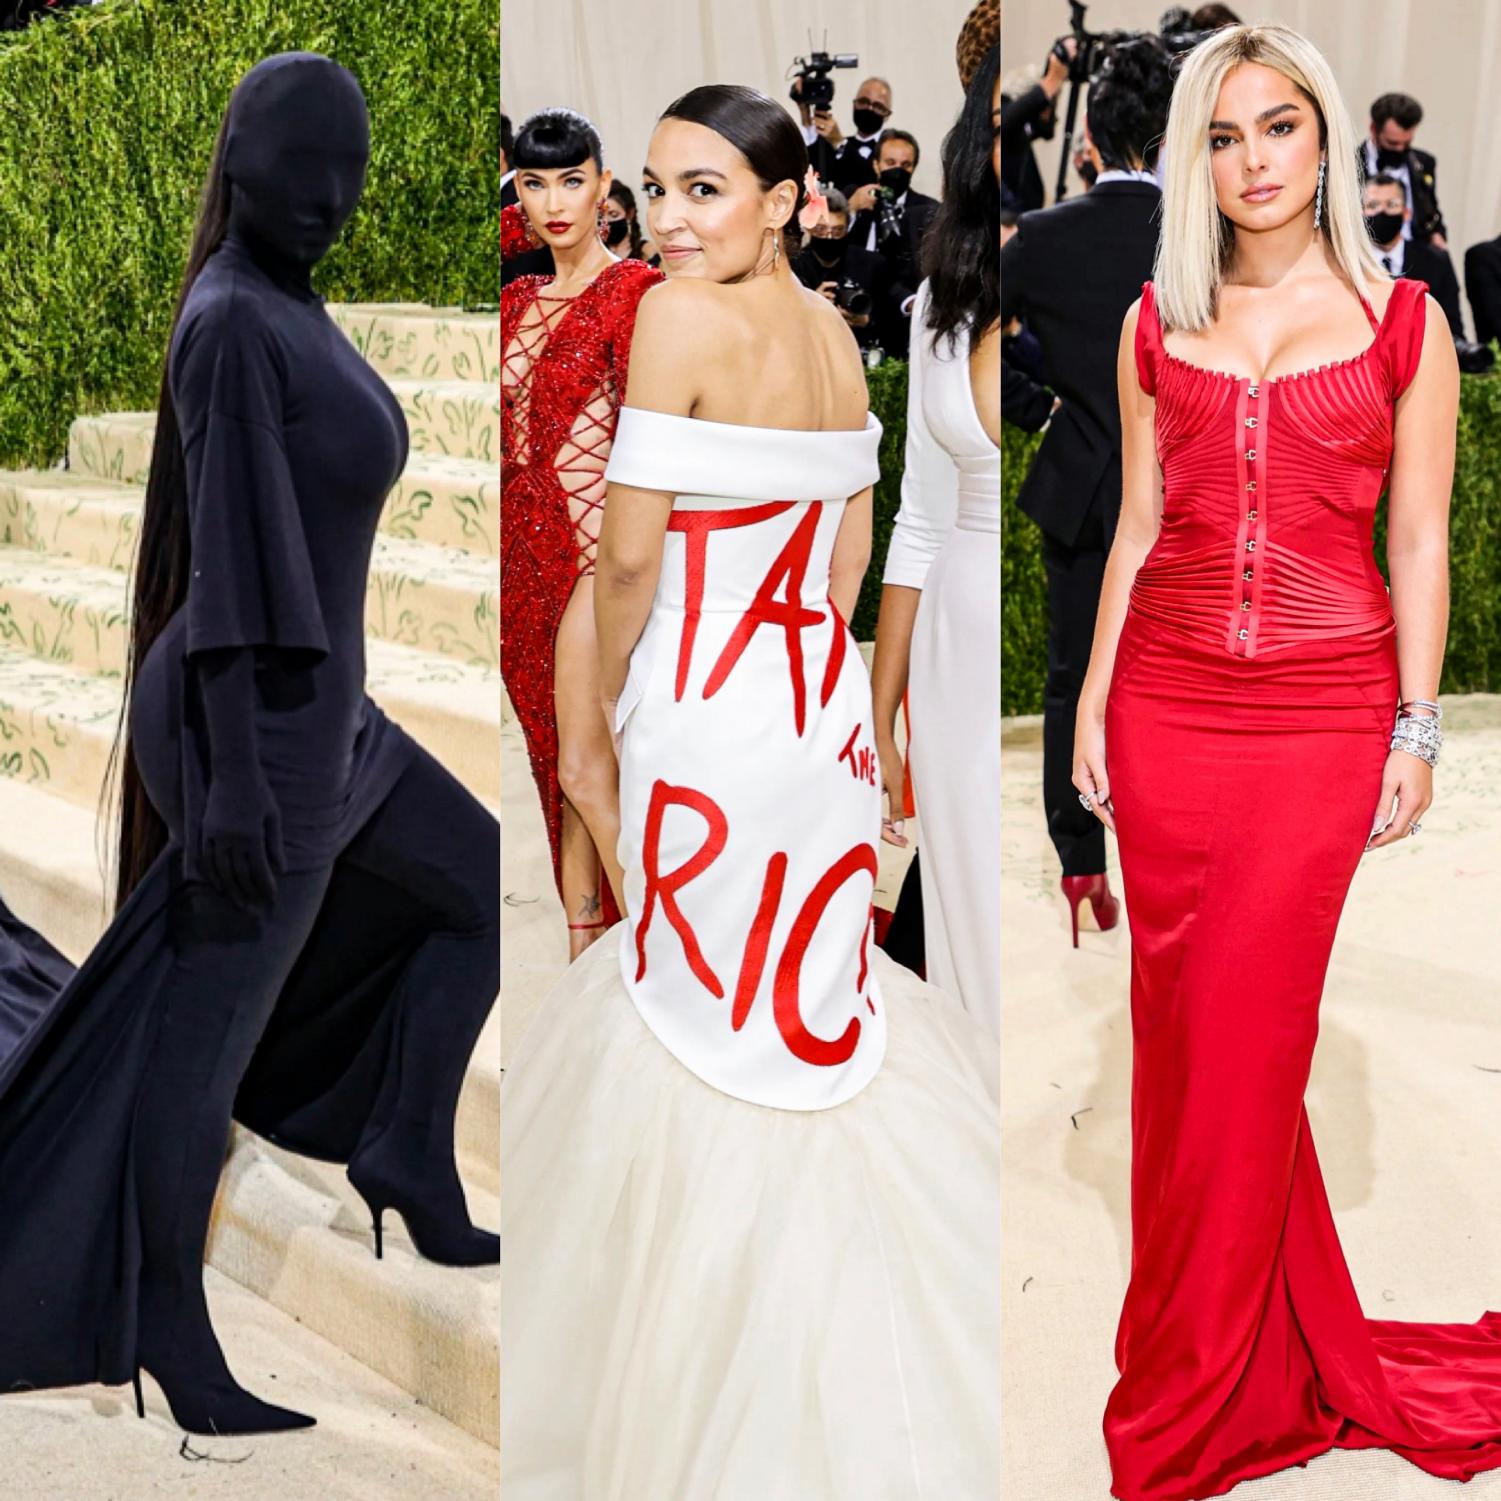 SATIRE: Second chance at Met Gala theme – The Daily Evergreen